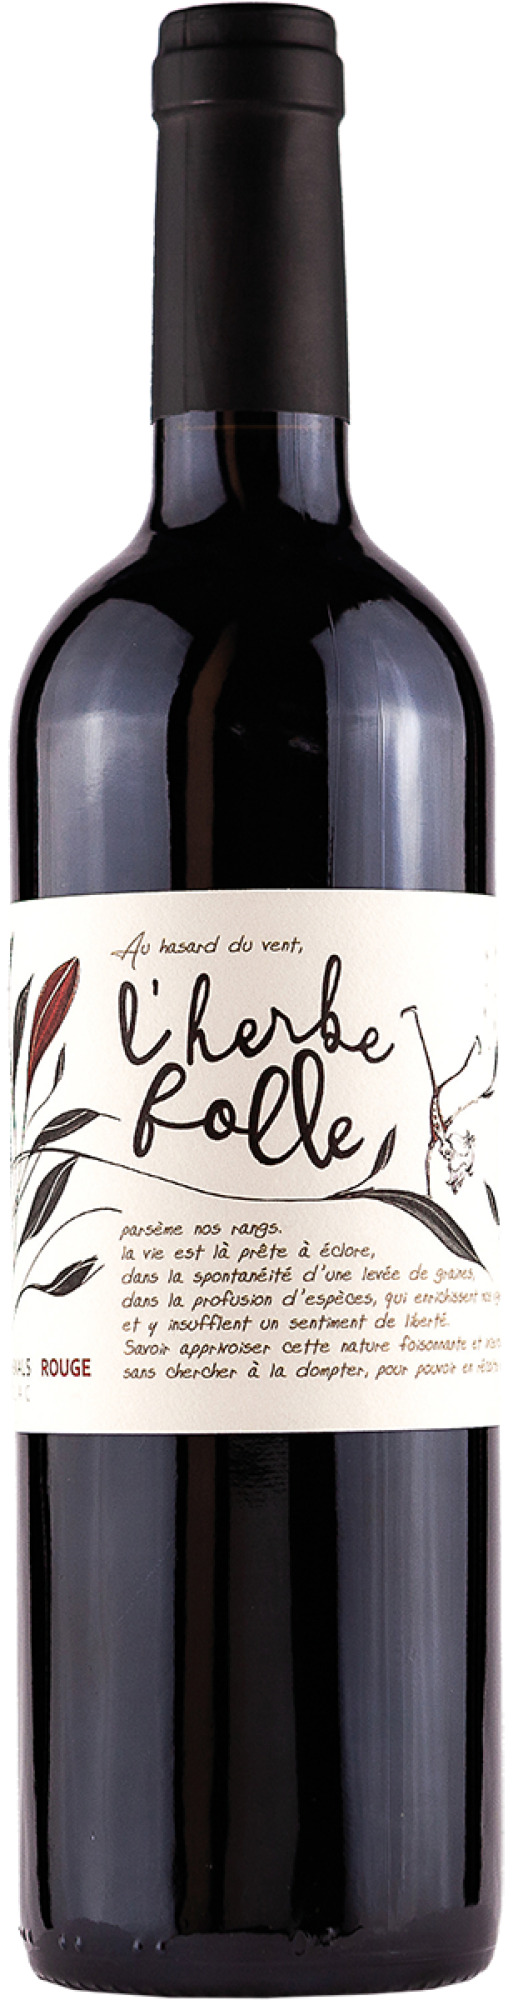 Herbe Folle Rouge  Gaillac AOC